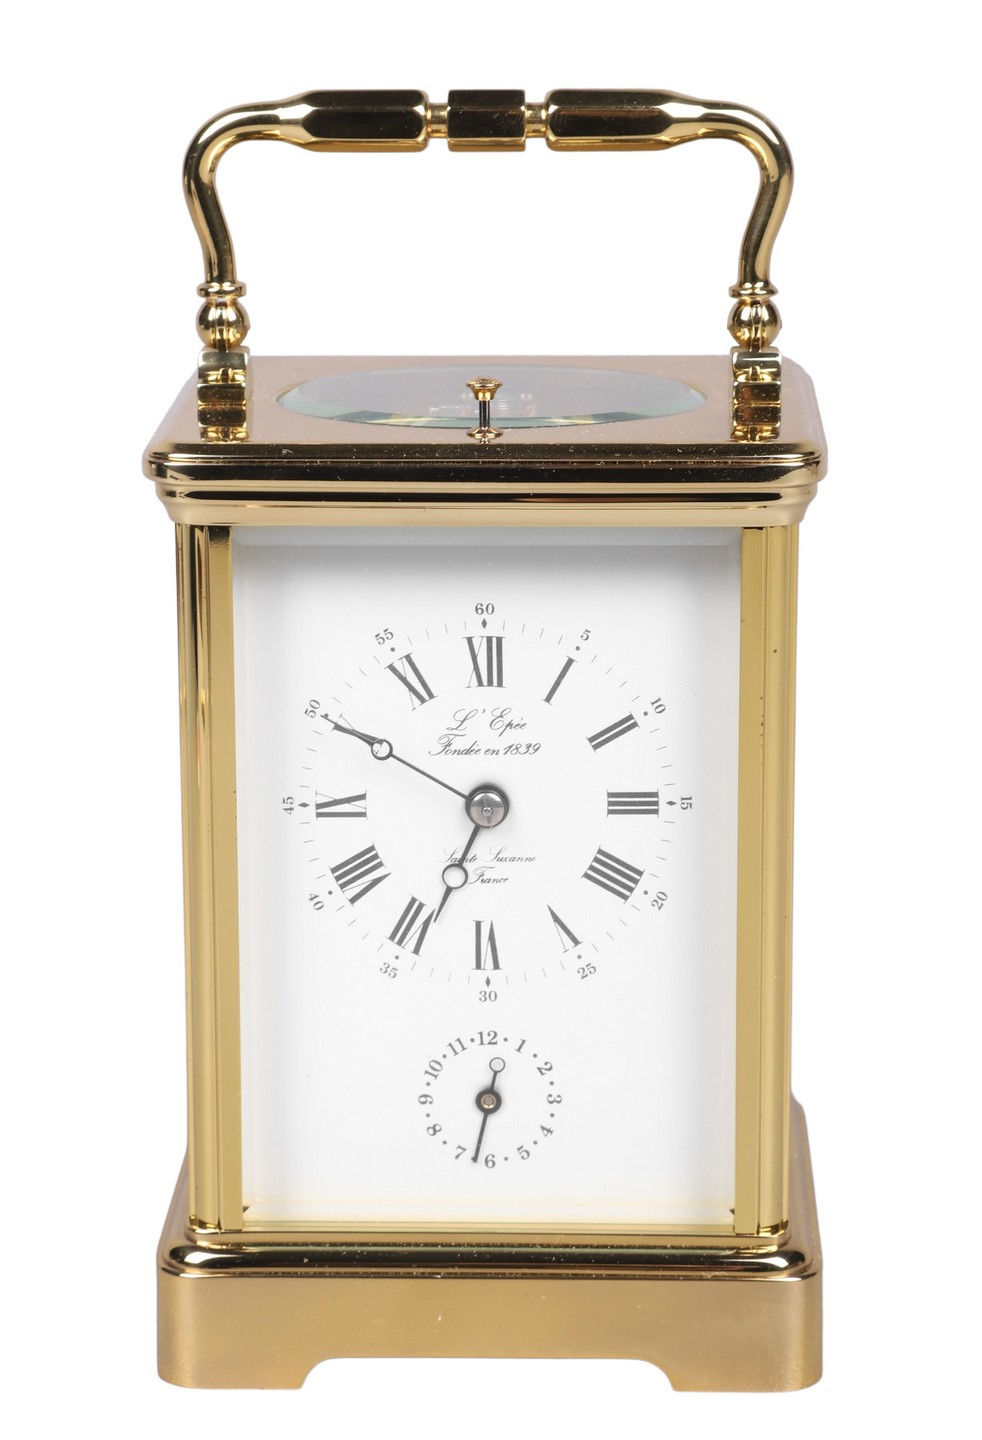 L Epee French Brass Carriage Clock  2e0a1c